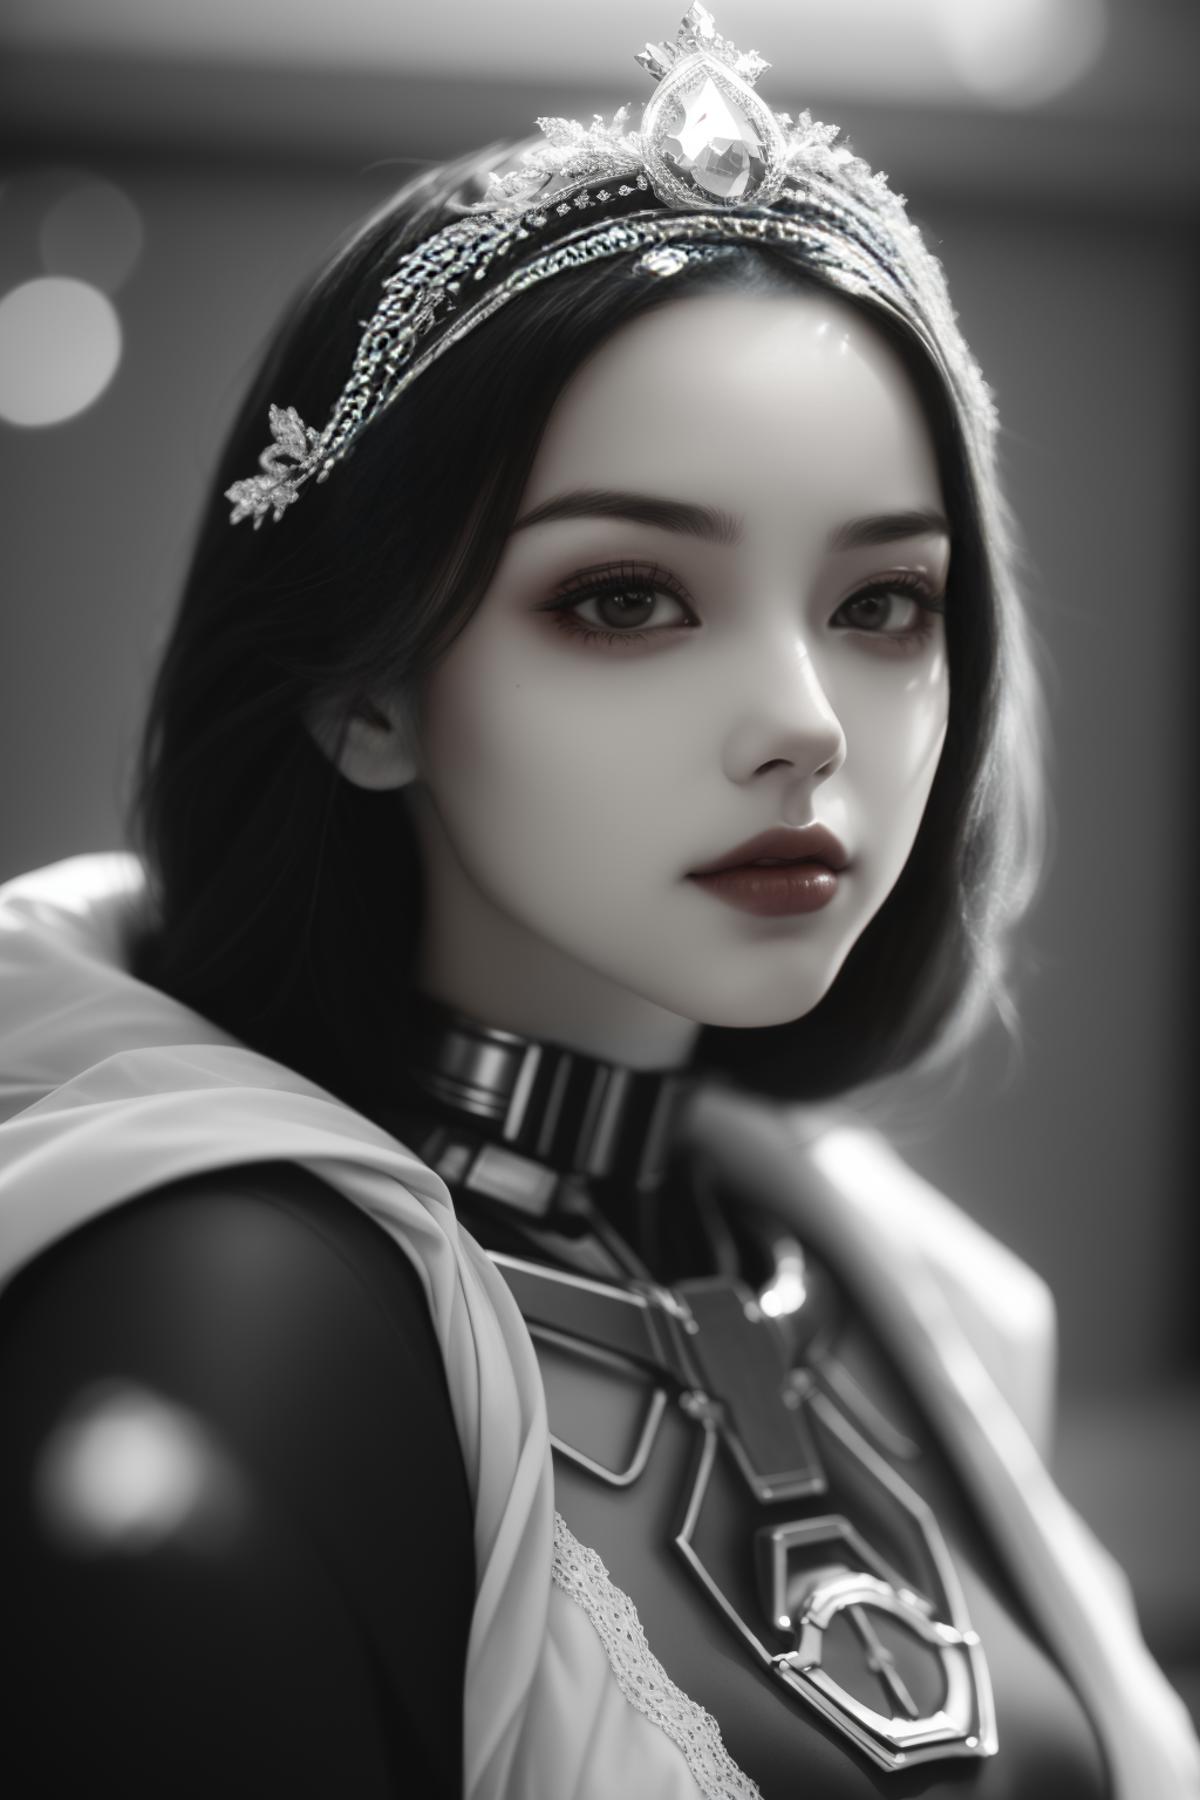 AI model image by Tykope